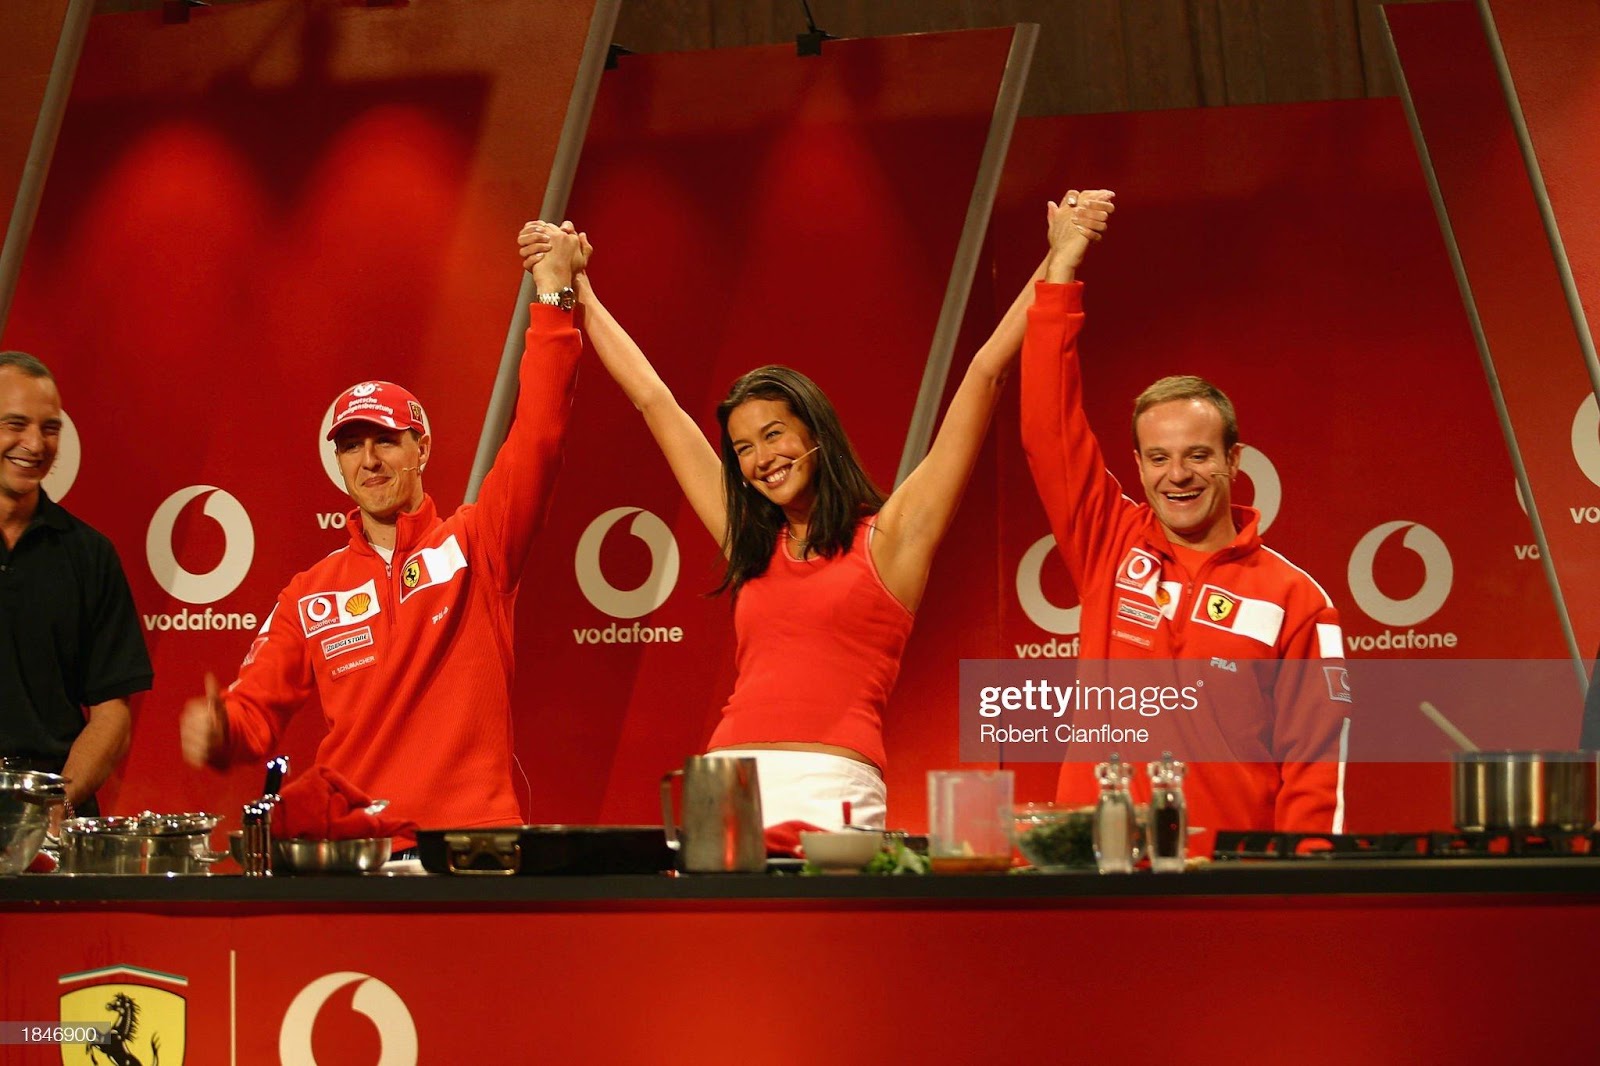 Michael Schumacher and Rubens Barrichello join supermodel Megan Gale in the Ferrari Cook Off held at the Vodafone Arena as part of the Australian F1 Grand Prix at Albert Park in Melbourne, on March 6, 2002. 